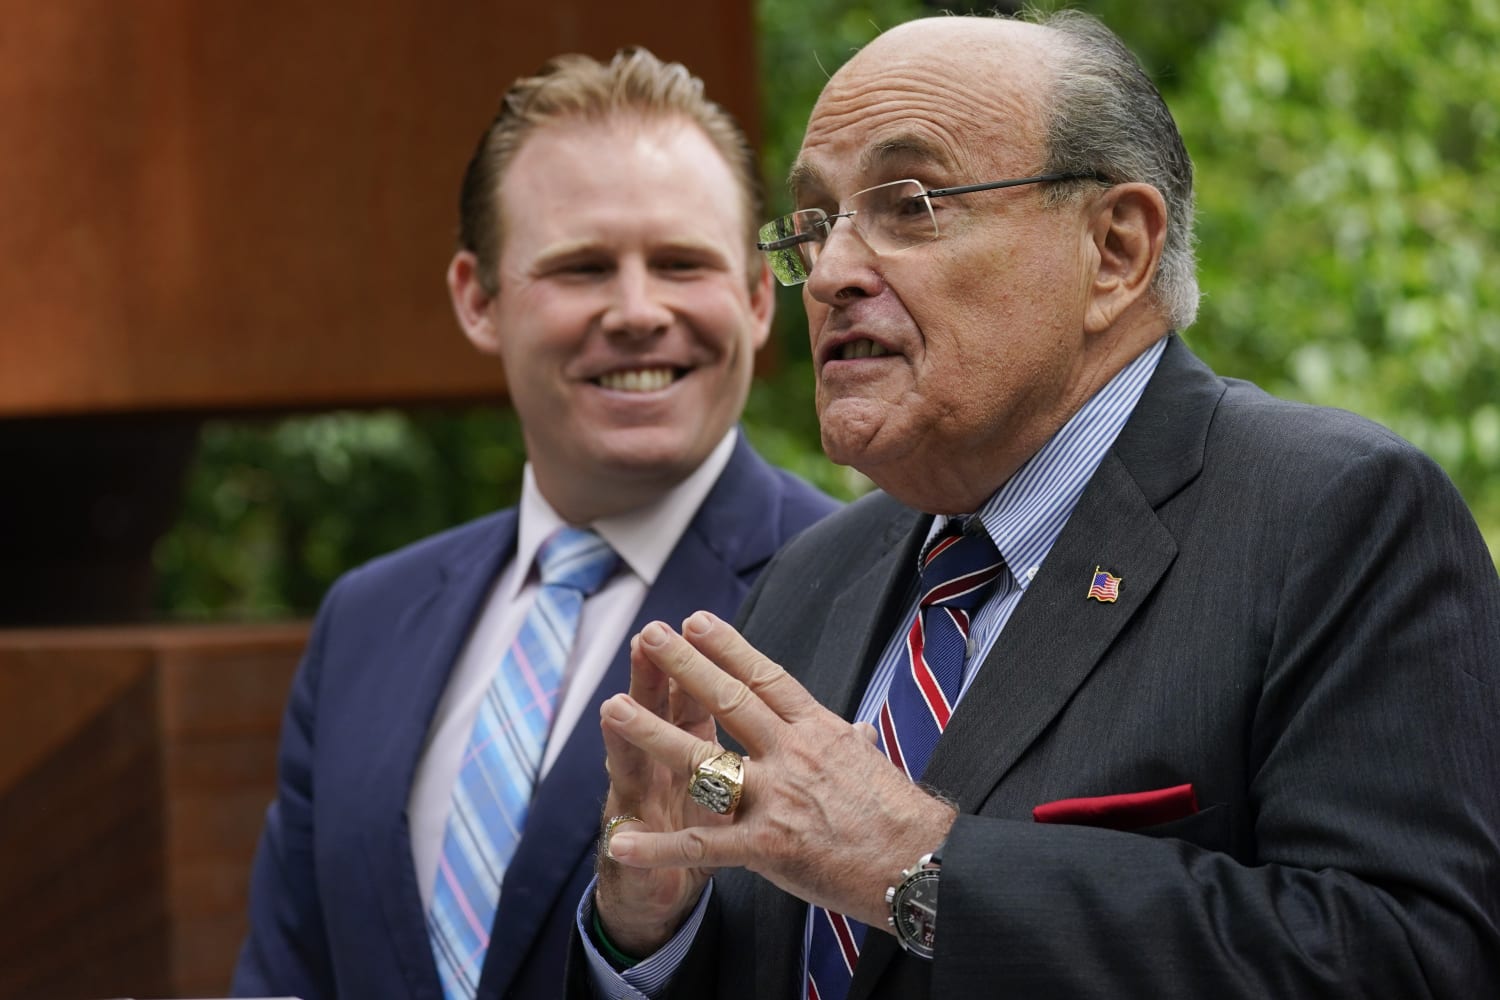 Man in custody after Rudy Giuliani 'slapped' on his back, police say